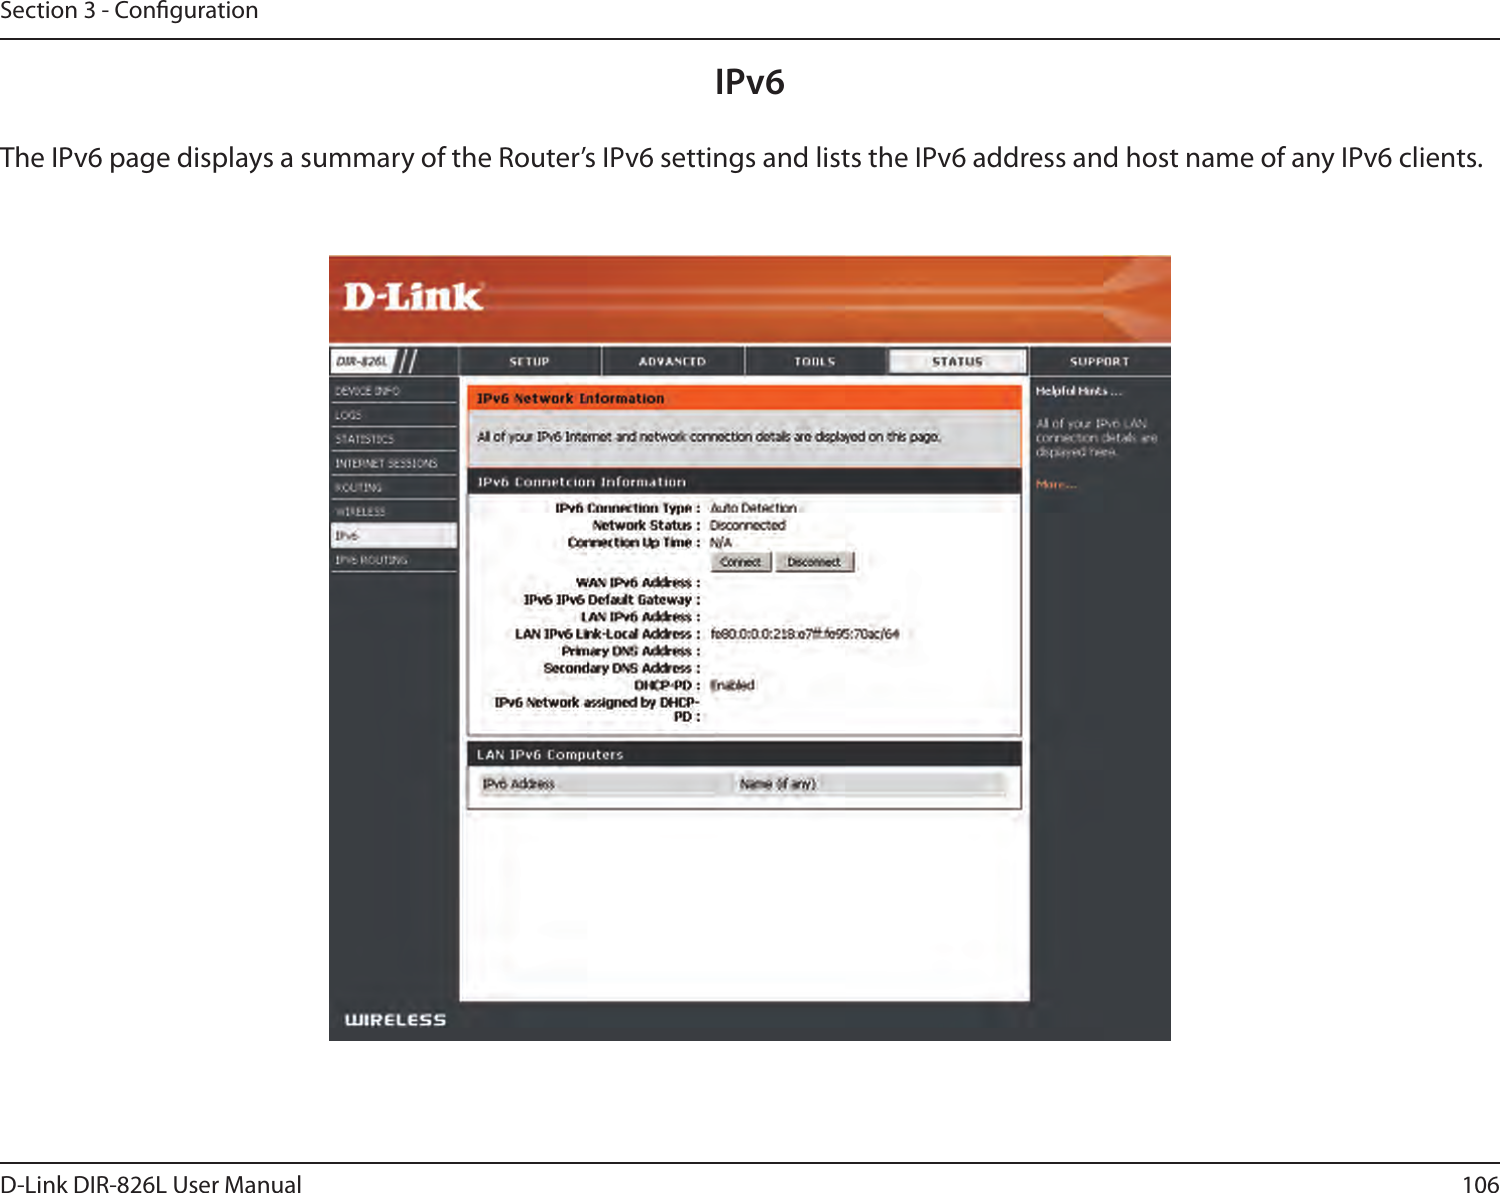 106D-Link DIR-826L User ManualSection 3 - CongurationIPv6The IPv6 page displays a summary of the Router’s IPv6 settings and lists the IPv6 address and host name of any IPv6 clients. 